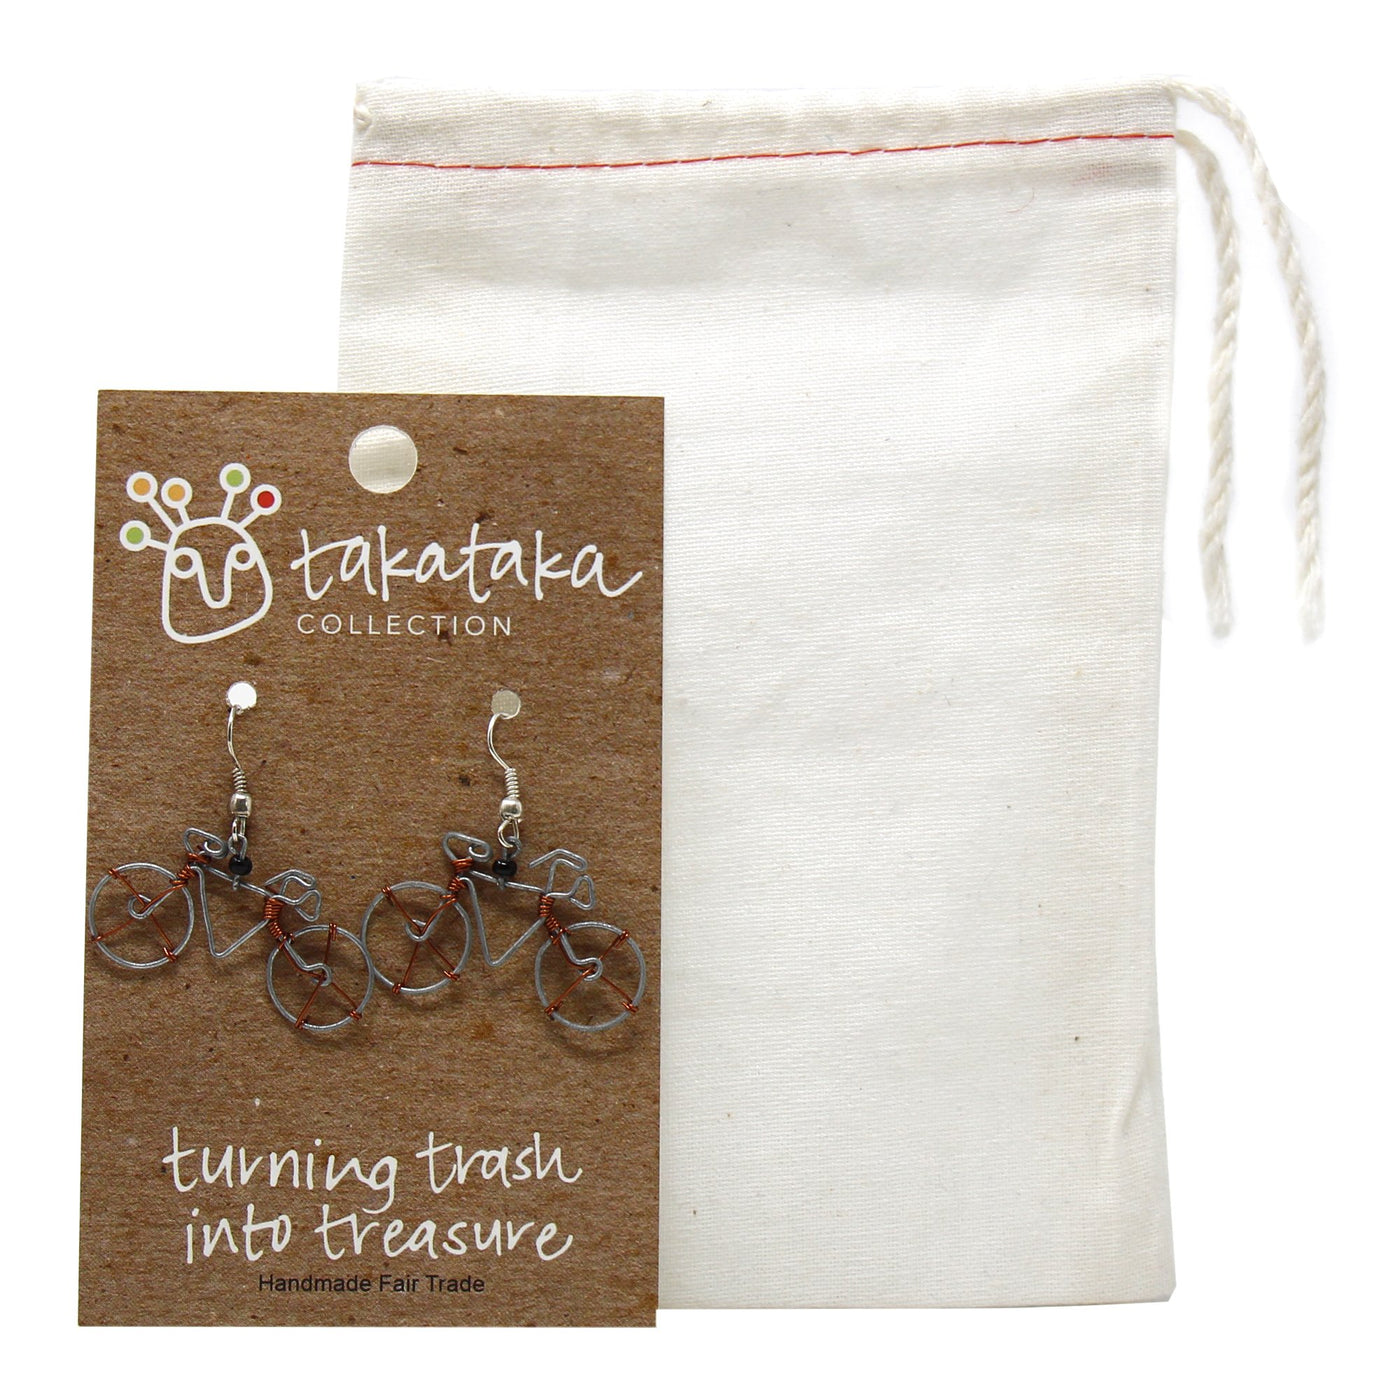 Wire Bicycle Earrings - Creative Alternatives - Yvonne’s 100th Wish Inc